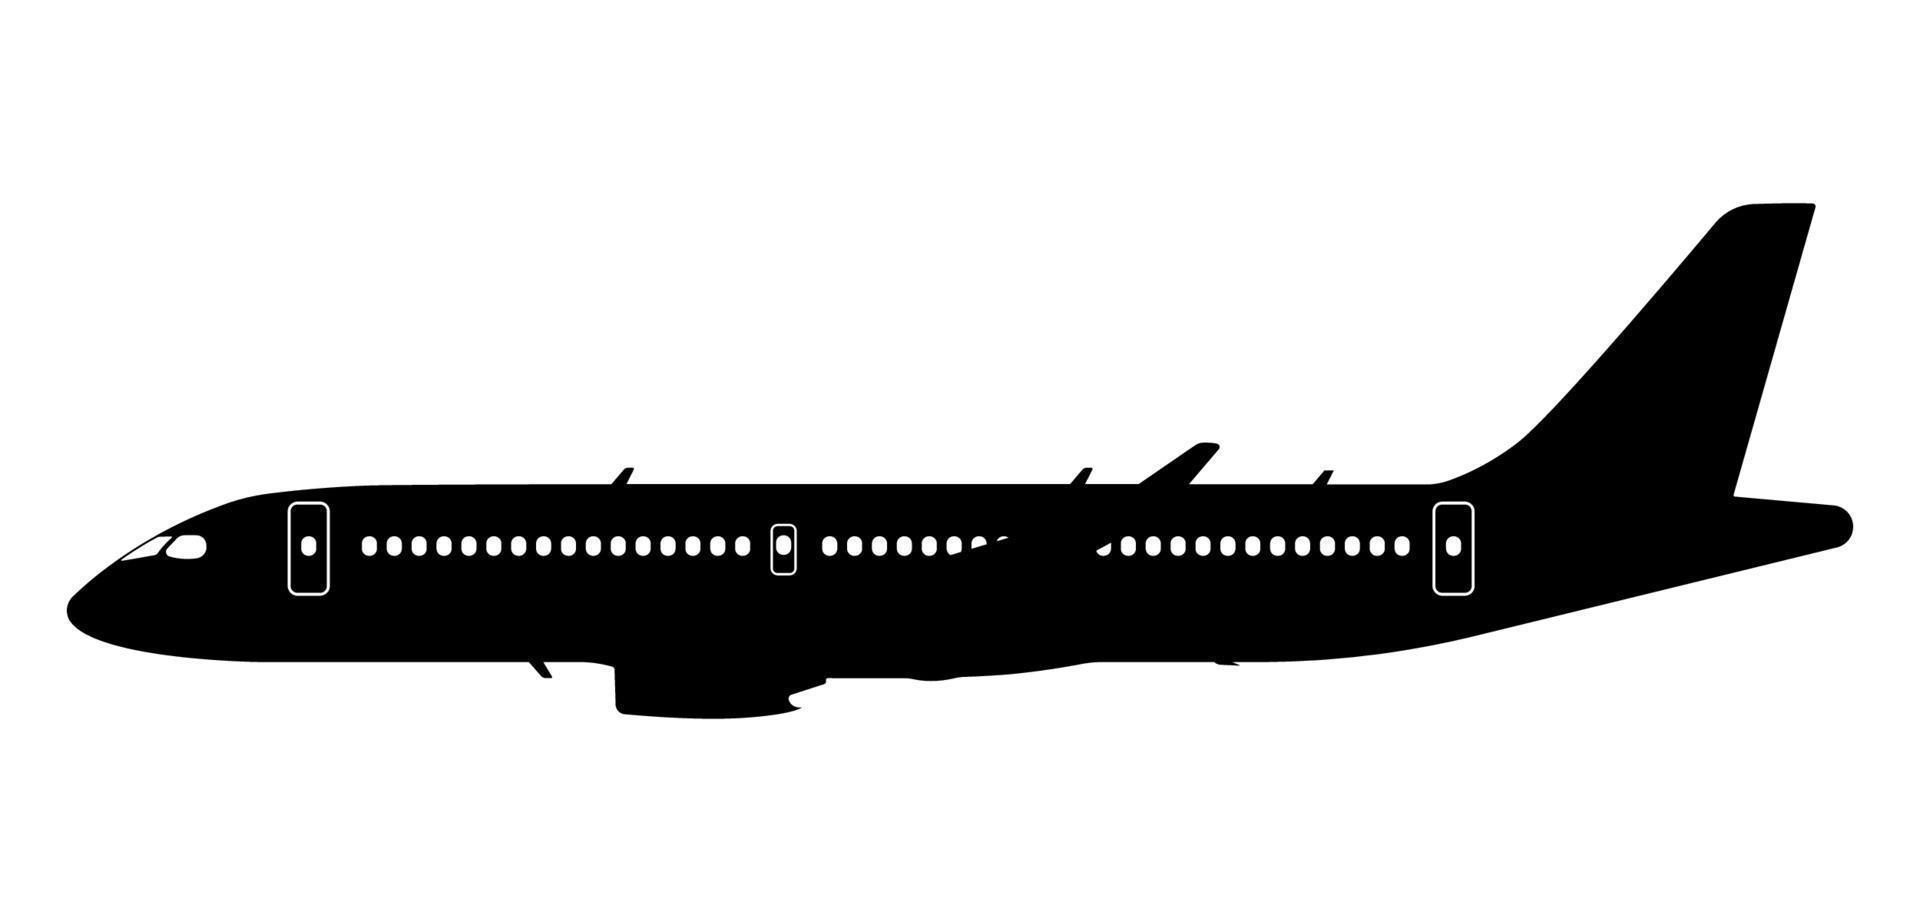 Flying Airplane Silhouette, Civil Wide Body Aircraft Illustration. vector